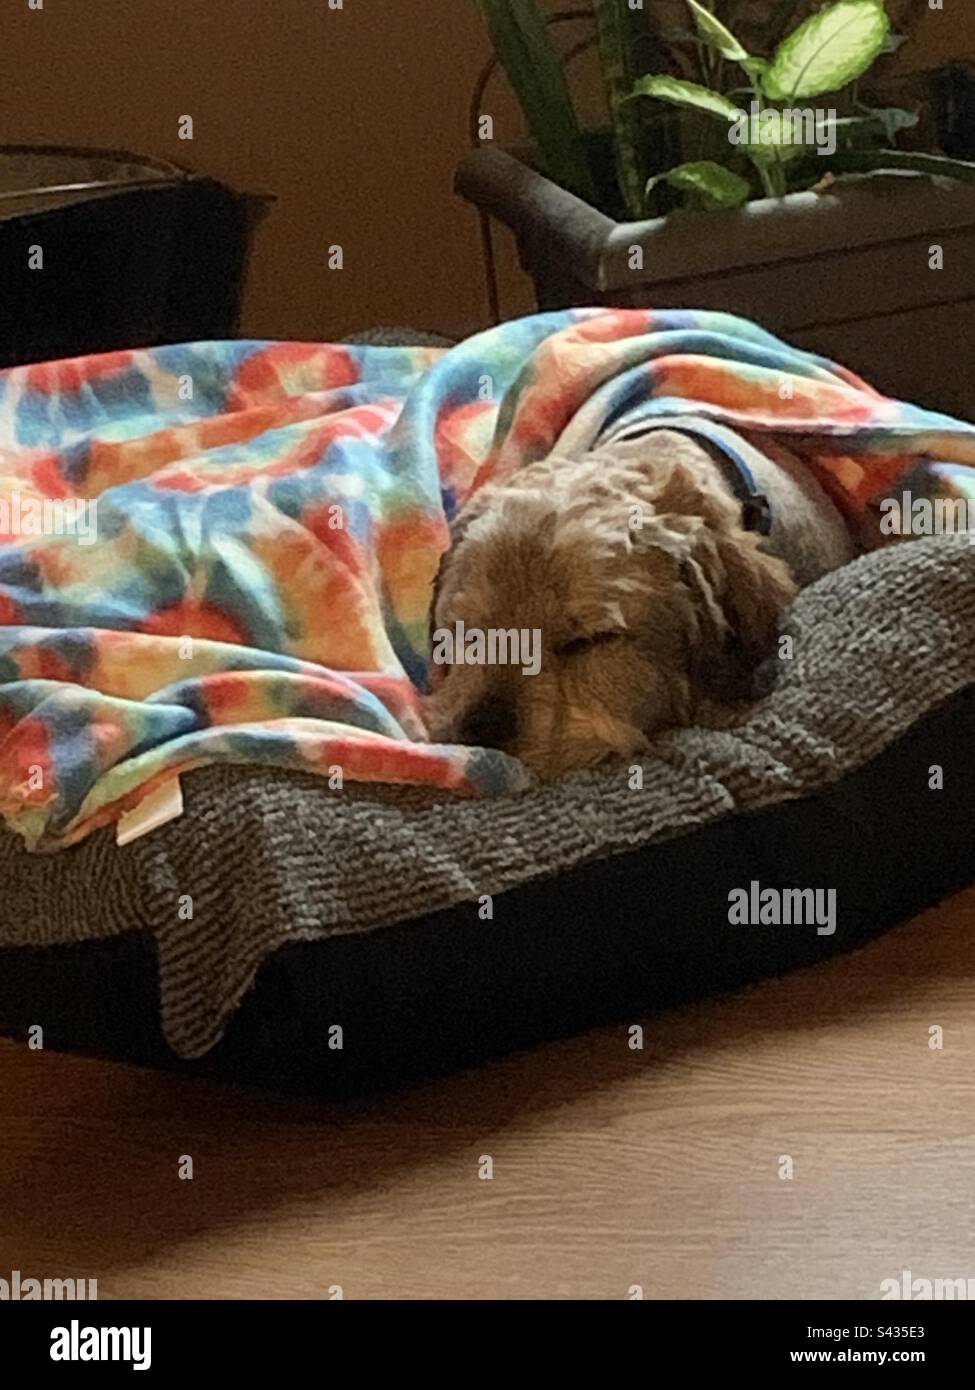 Sleeping dog covered up on their dog bed. Stock Photo